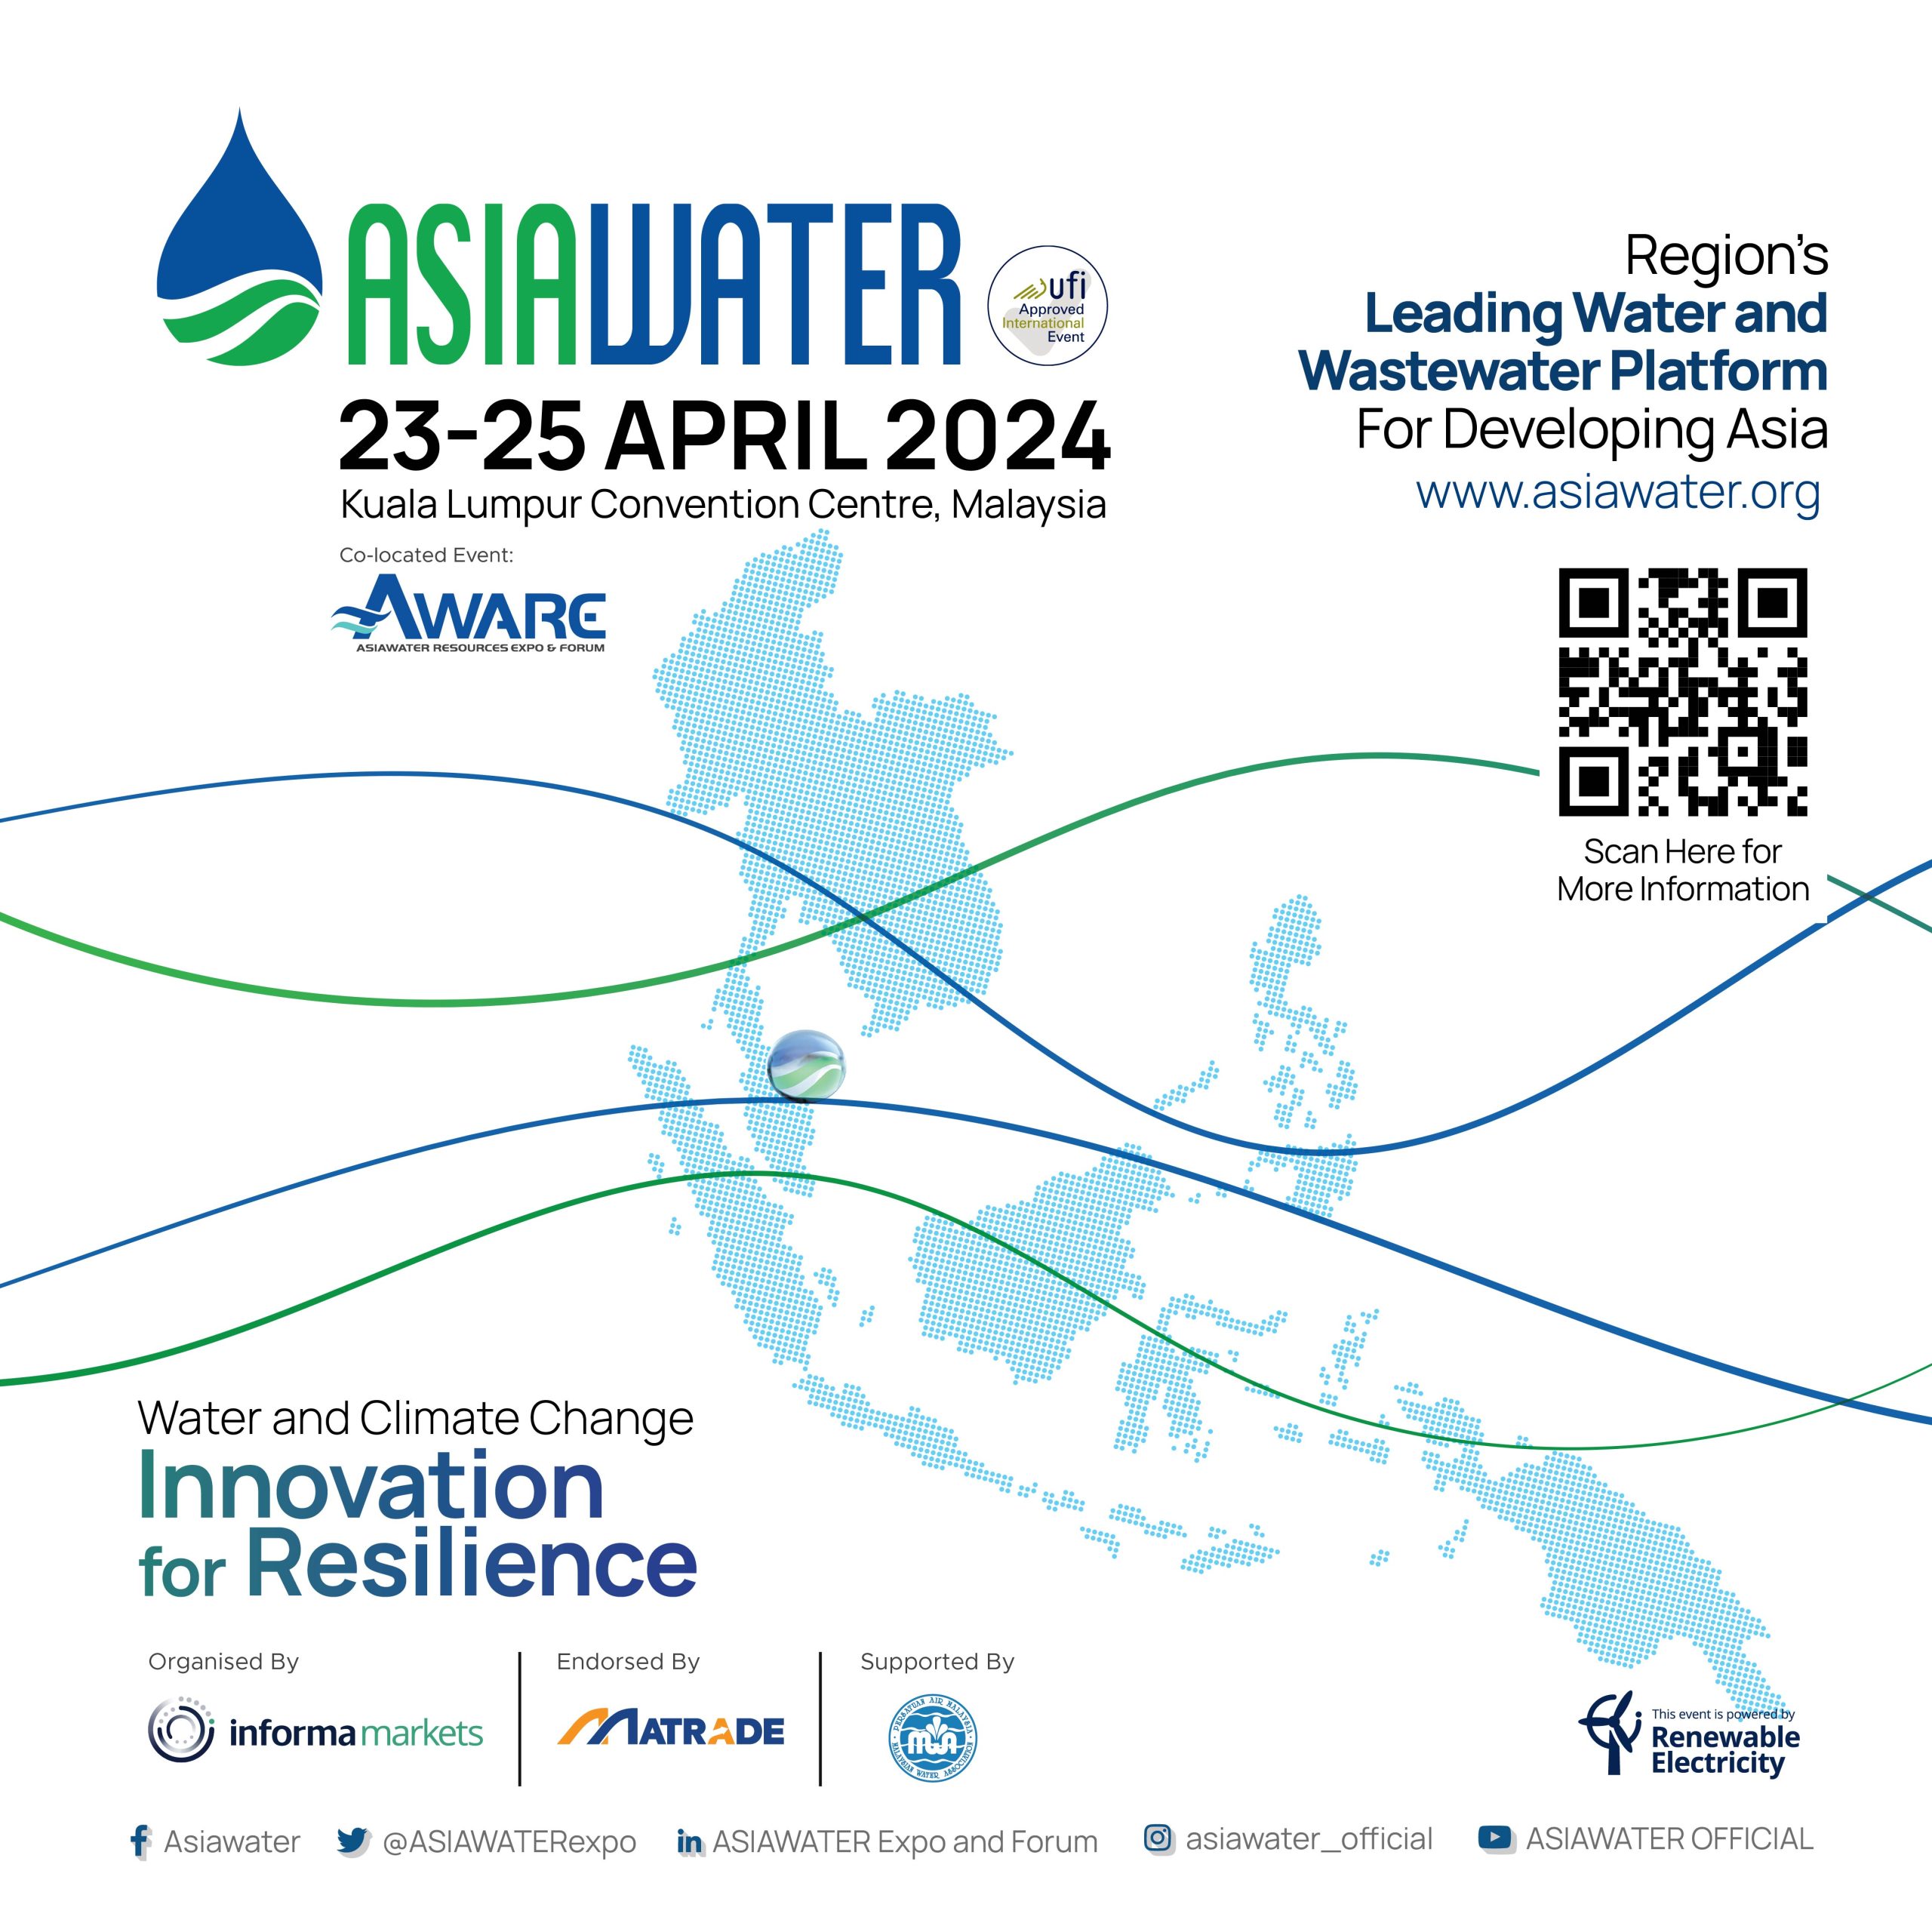 Asiawater 2024 at Kuala Lumpur Convention Centre